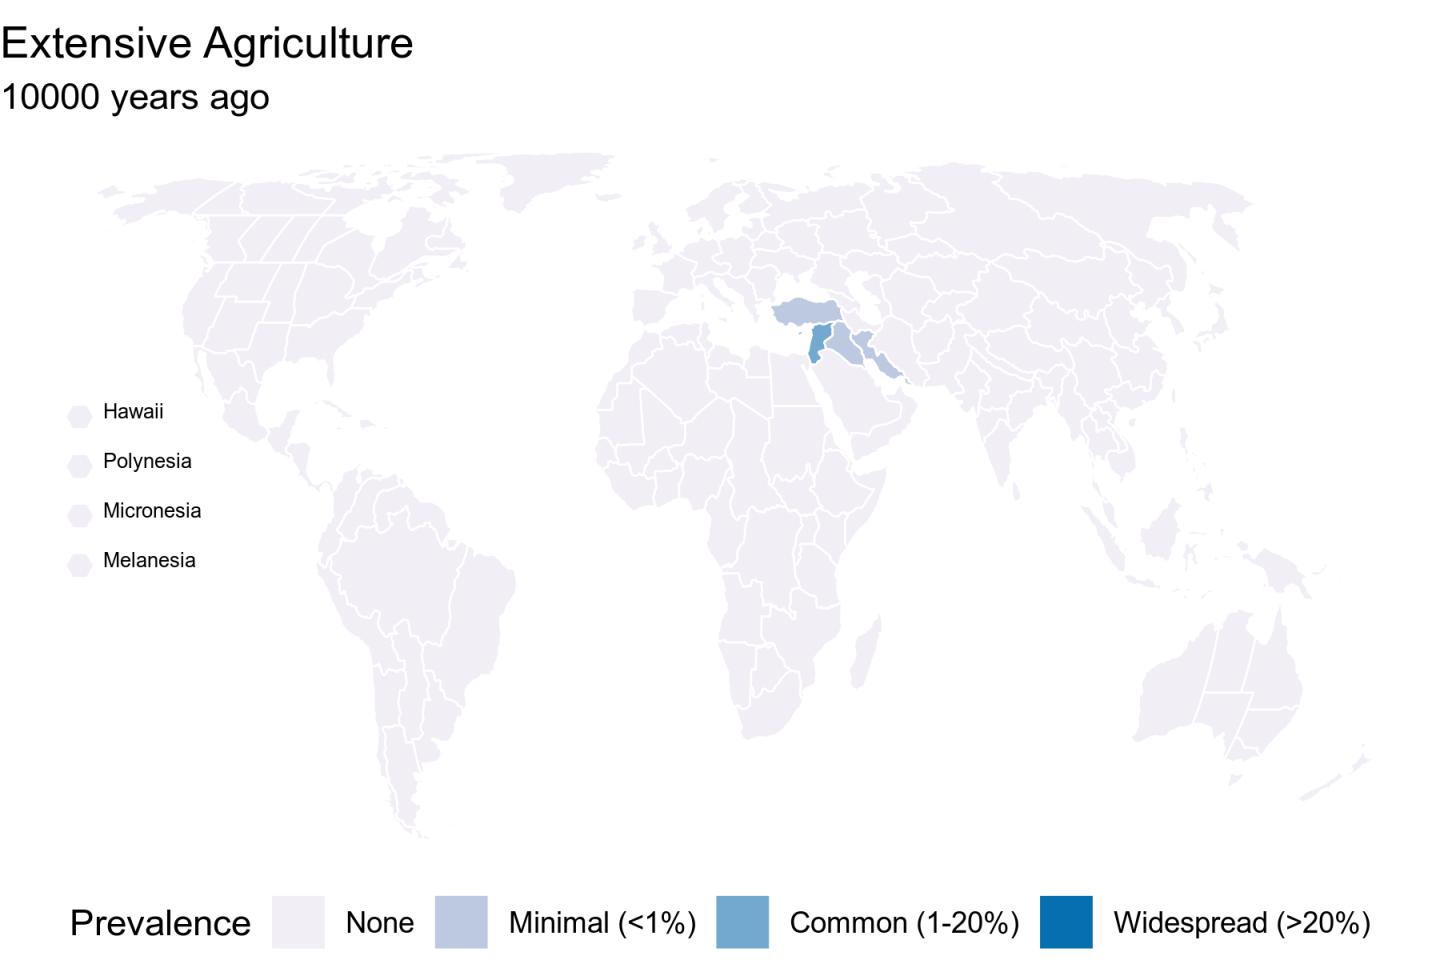 How Agriculture Spread around the World